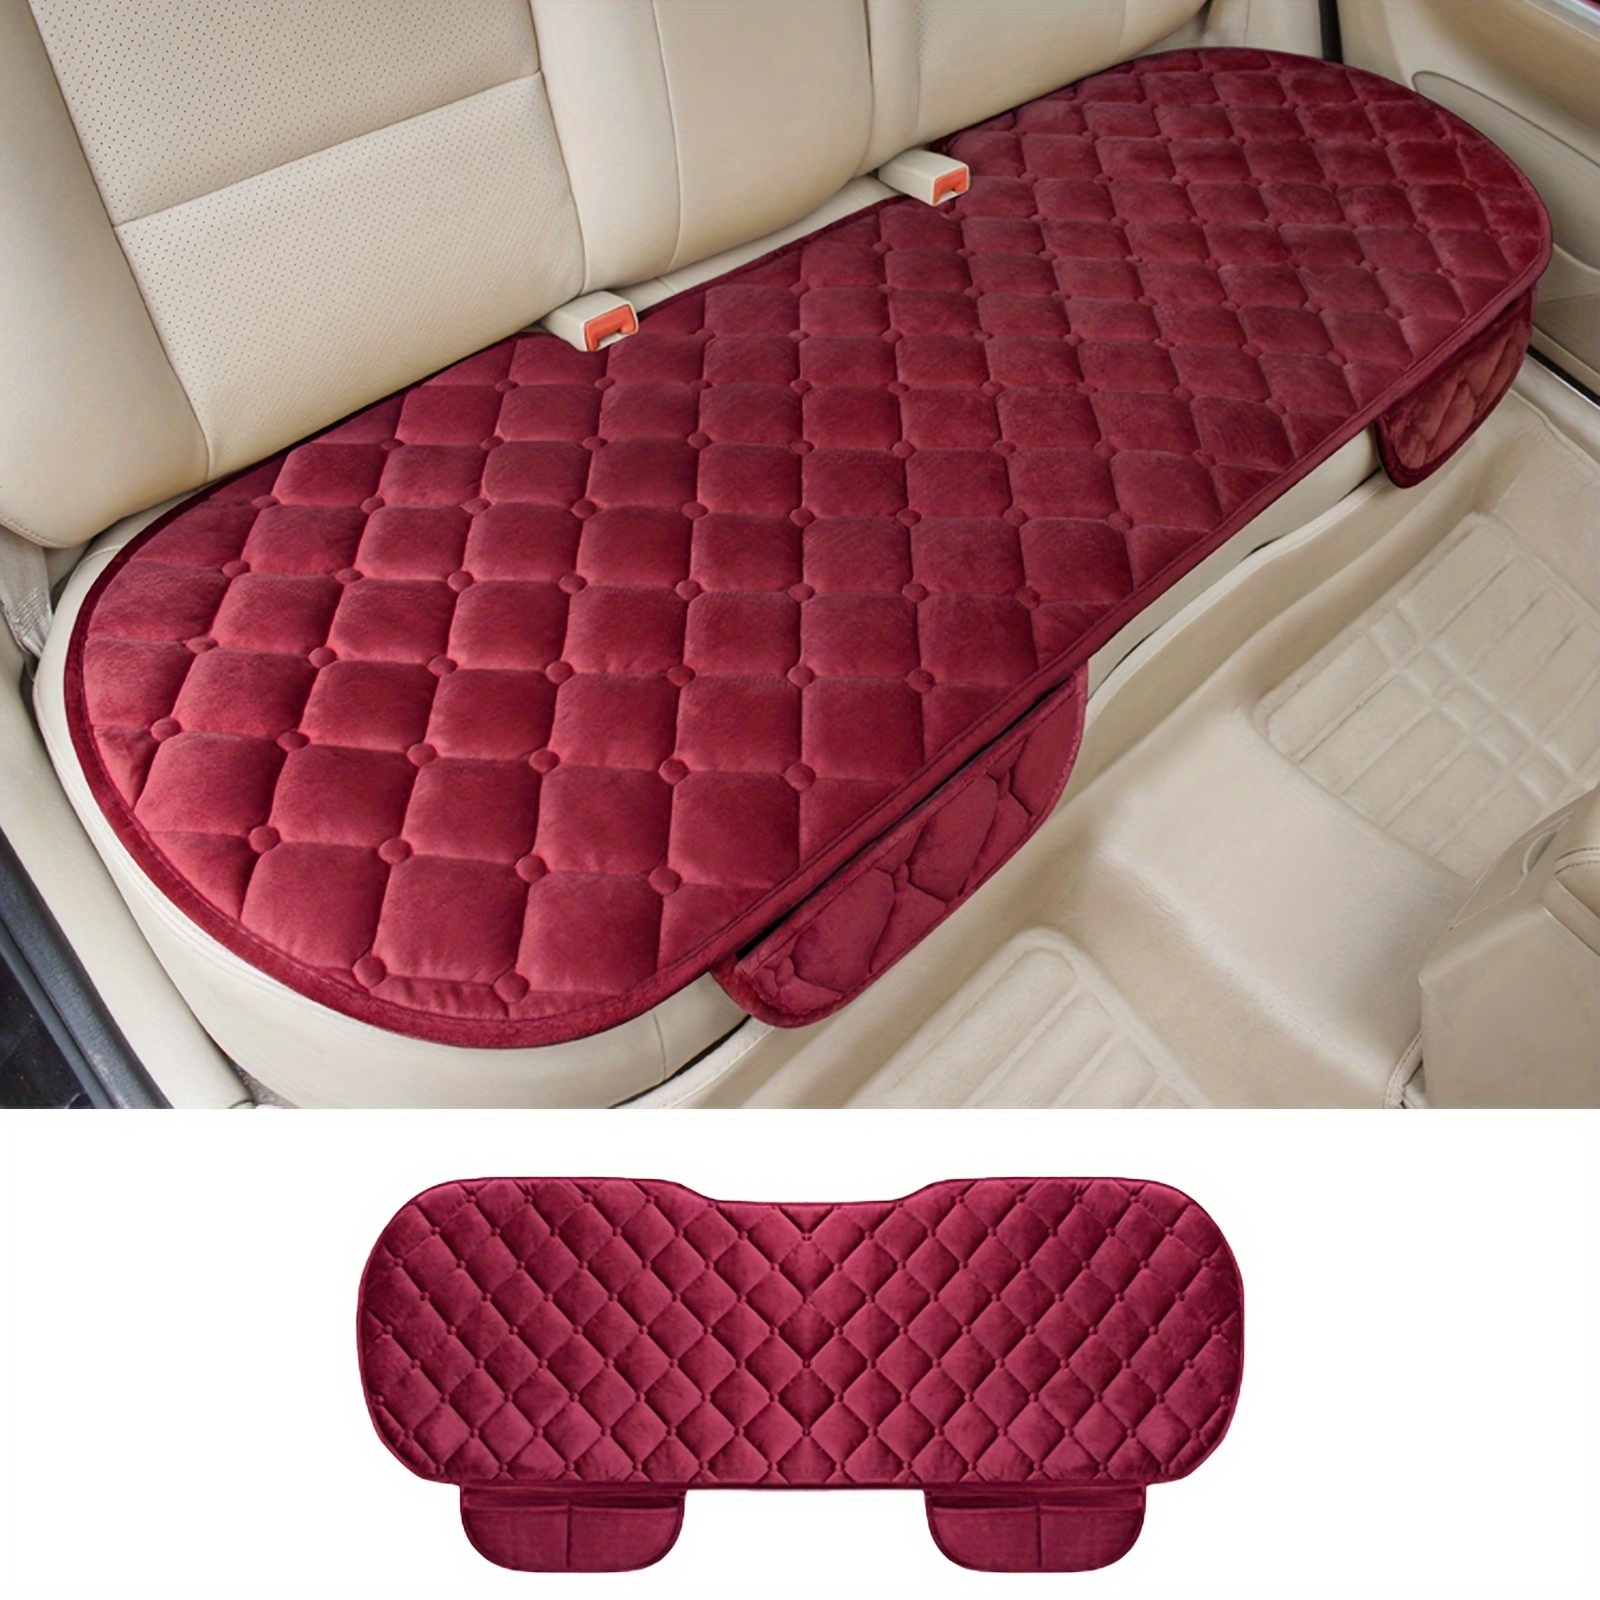 Red Car Seat Covers Protectors Universal washable Dog Pet full set front  rear